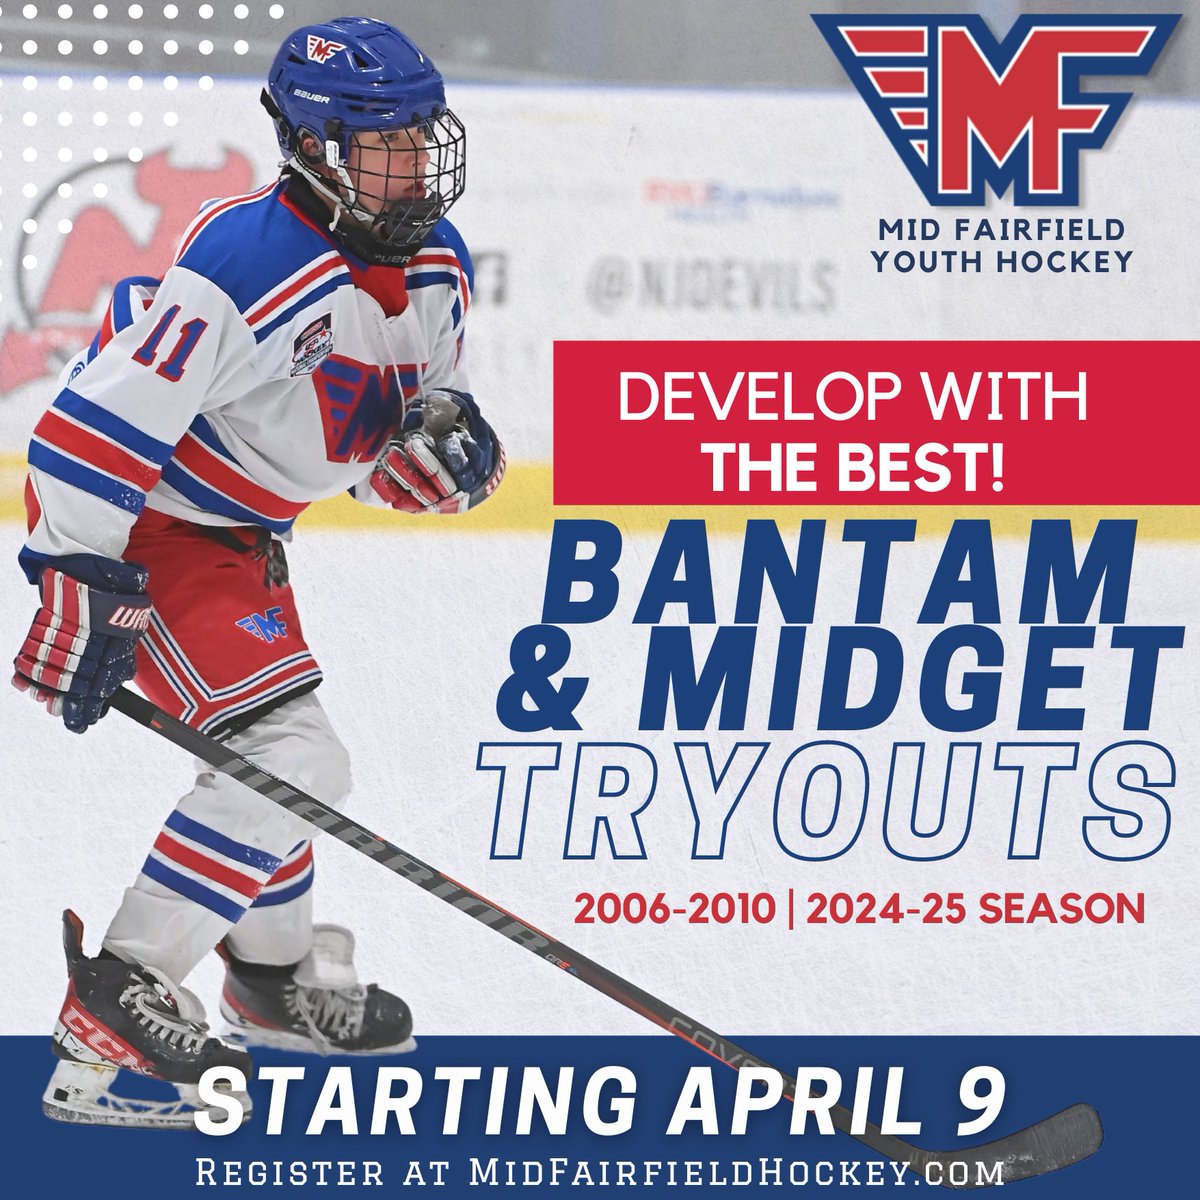 Tryouts start Tuesday!! Don’t miss the chance to gain exposure and develop with the #1 ranked organization in USA Youth Hockey 🇺🇸🥅🏒 #ROLLMF Sign up: bit.ly/MFTryouts